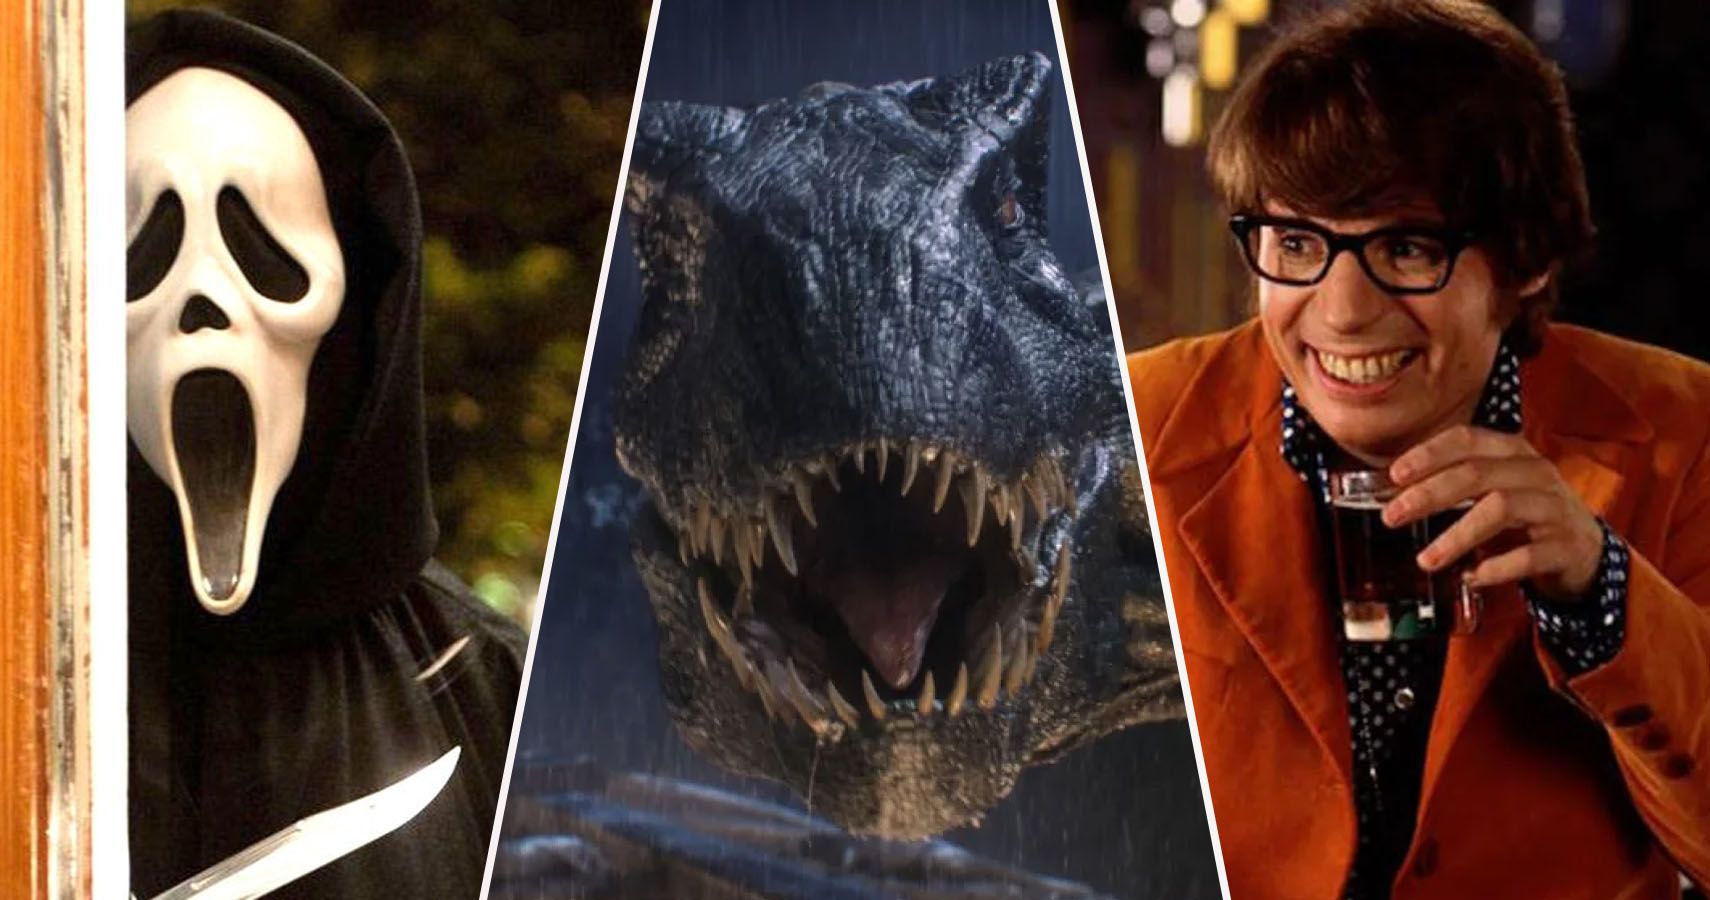 Ghostface from Scream, T-Rex from Jurassic Park, and Austin Powers